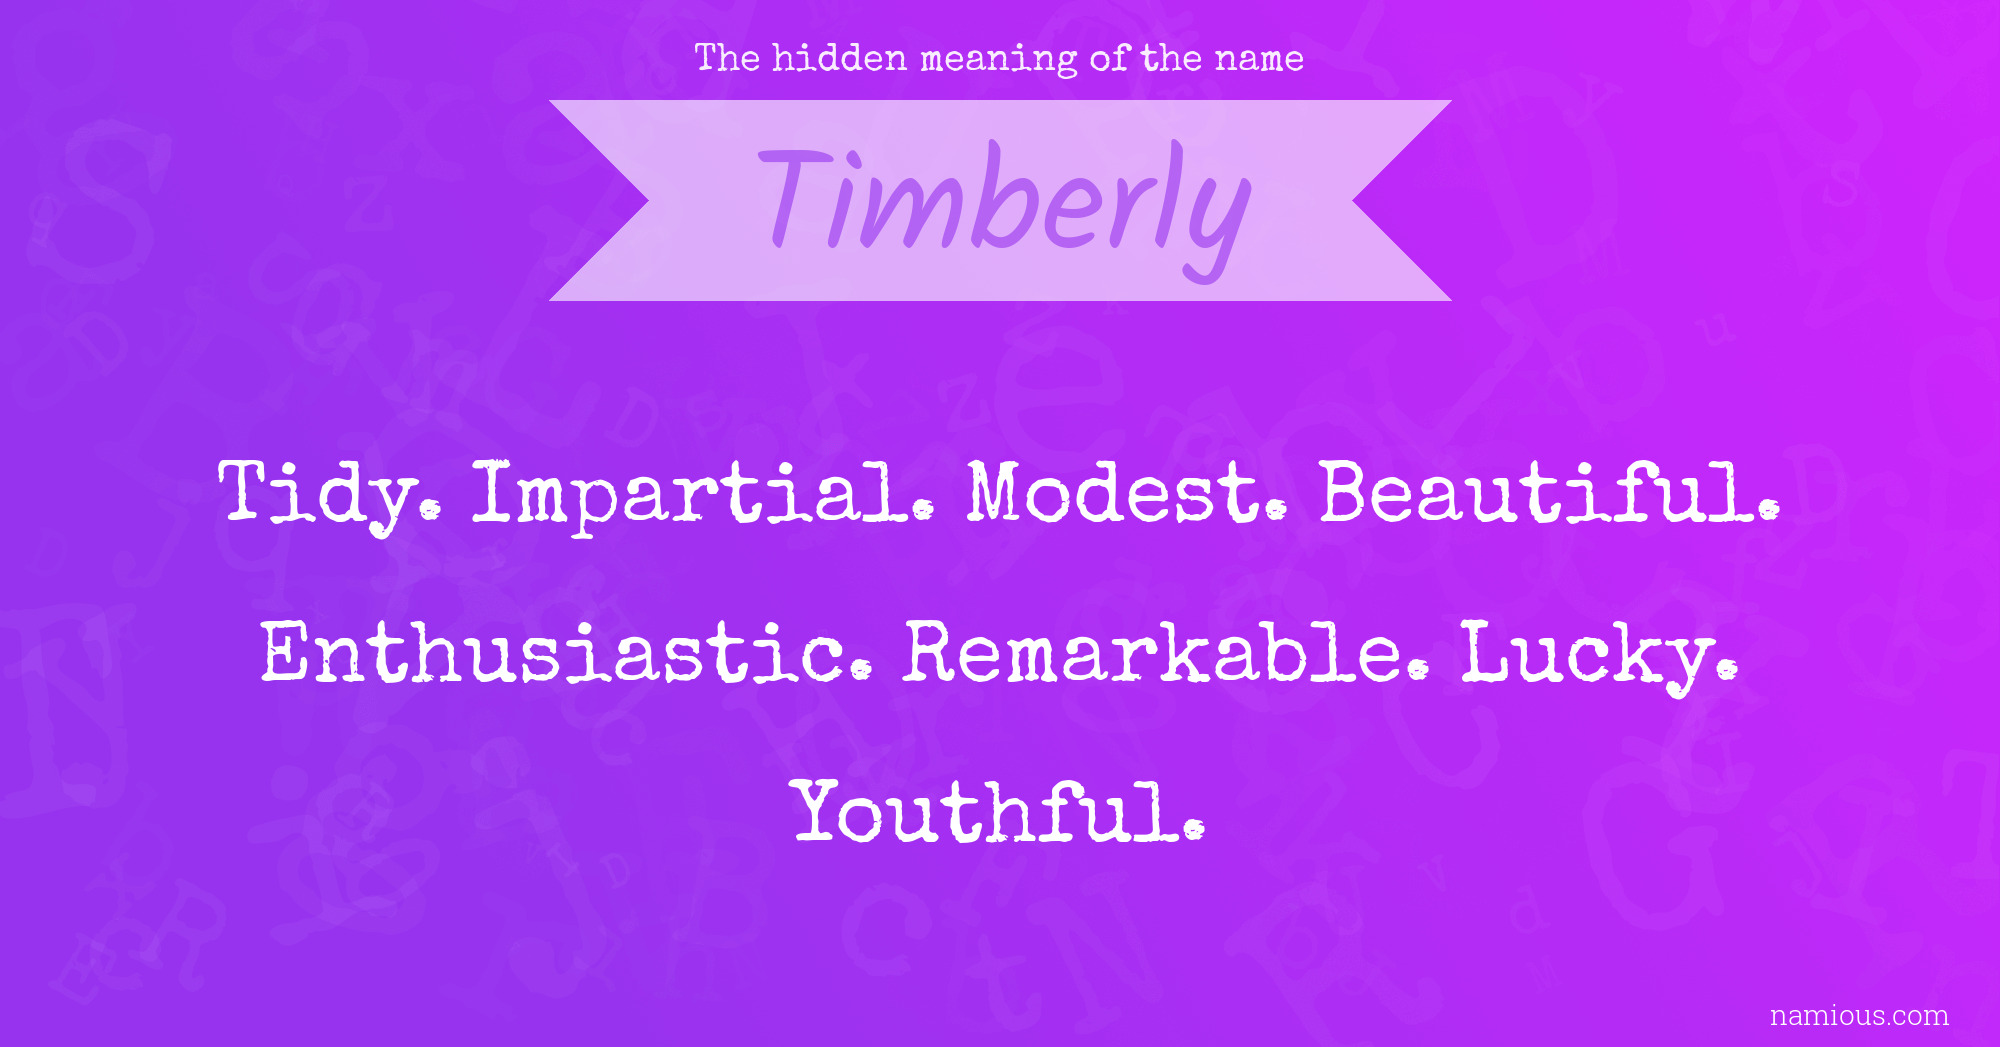 The hidden meaning of the name Timberly